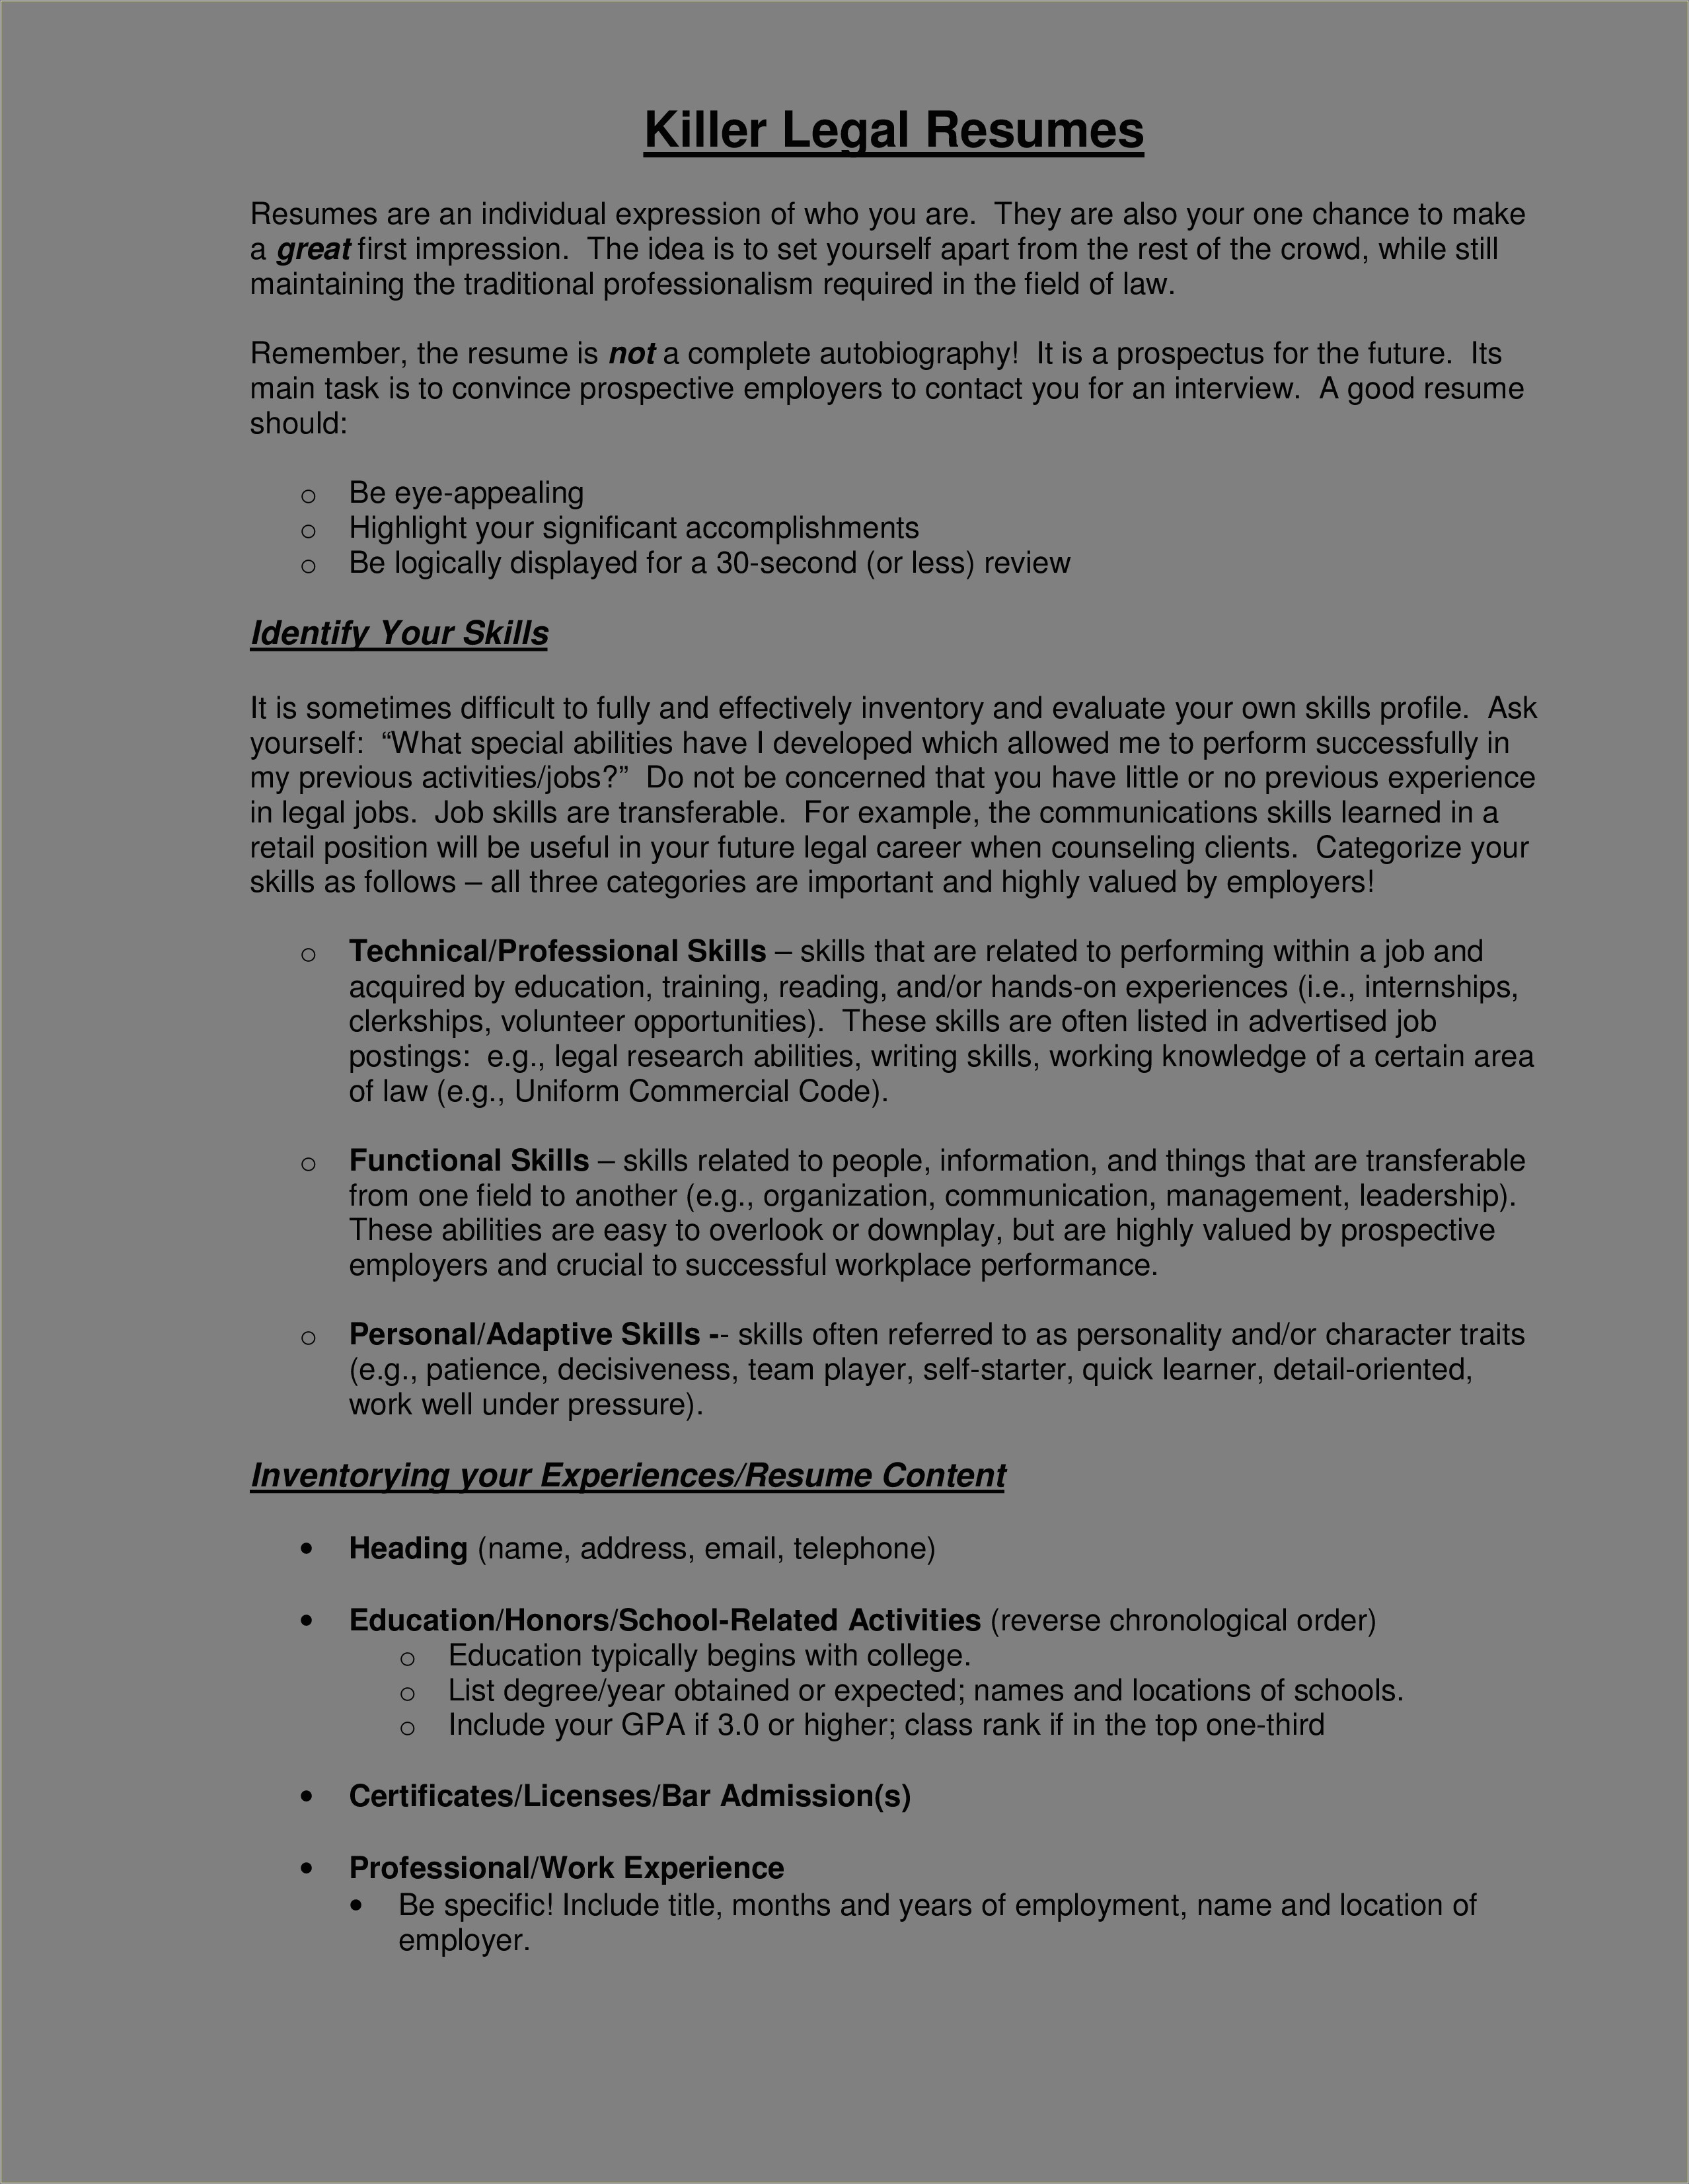 Where To Put Bar Admission On Resume - Resume Example Gallery